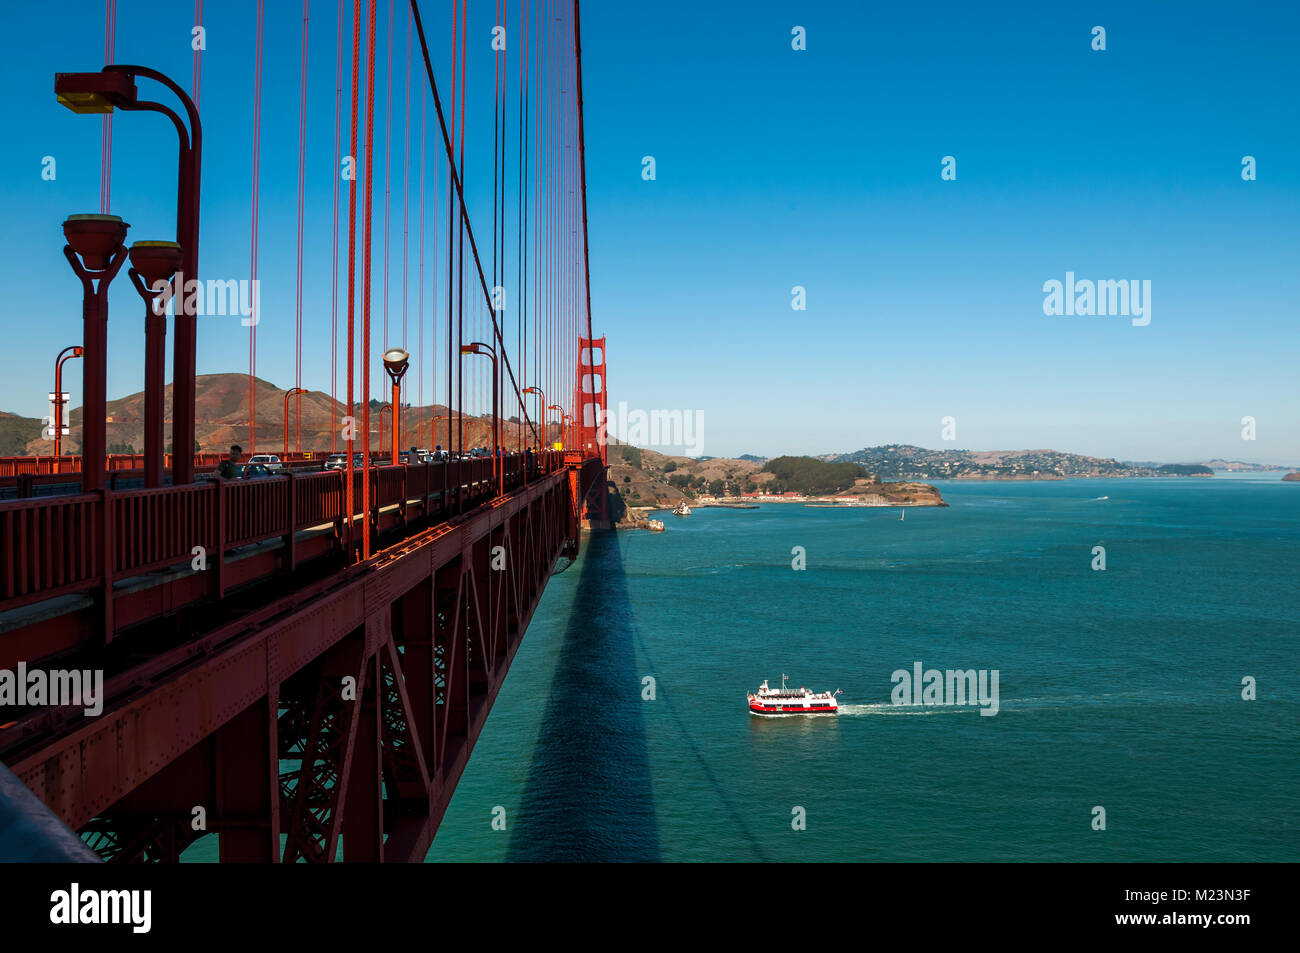 SAN FRANCISCO, CALIFORNIA - SEPTEMBER 8, 2015 - Golden Gate Bridge with pedestrians crossing and boat passing under Stock Photo